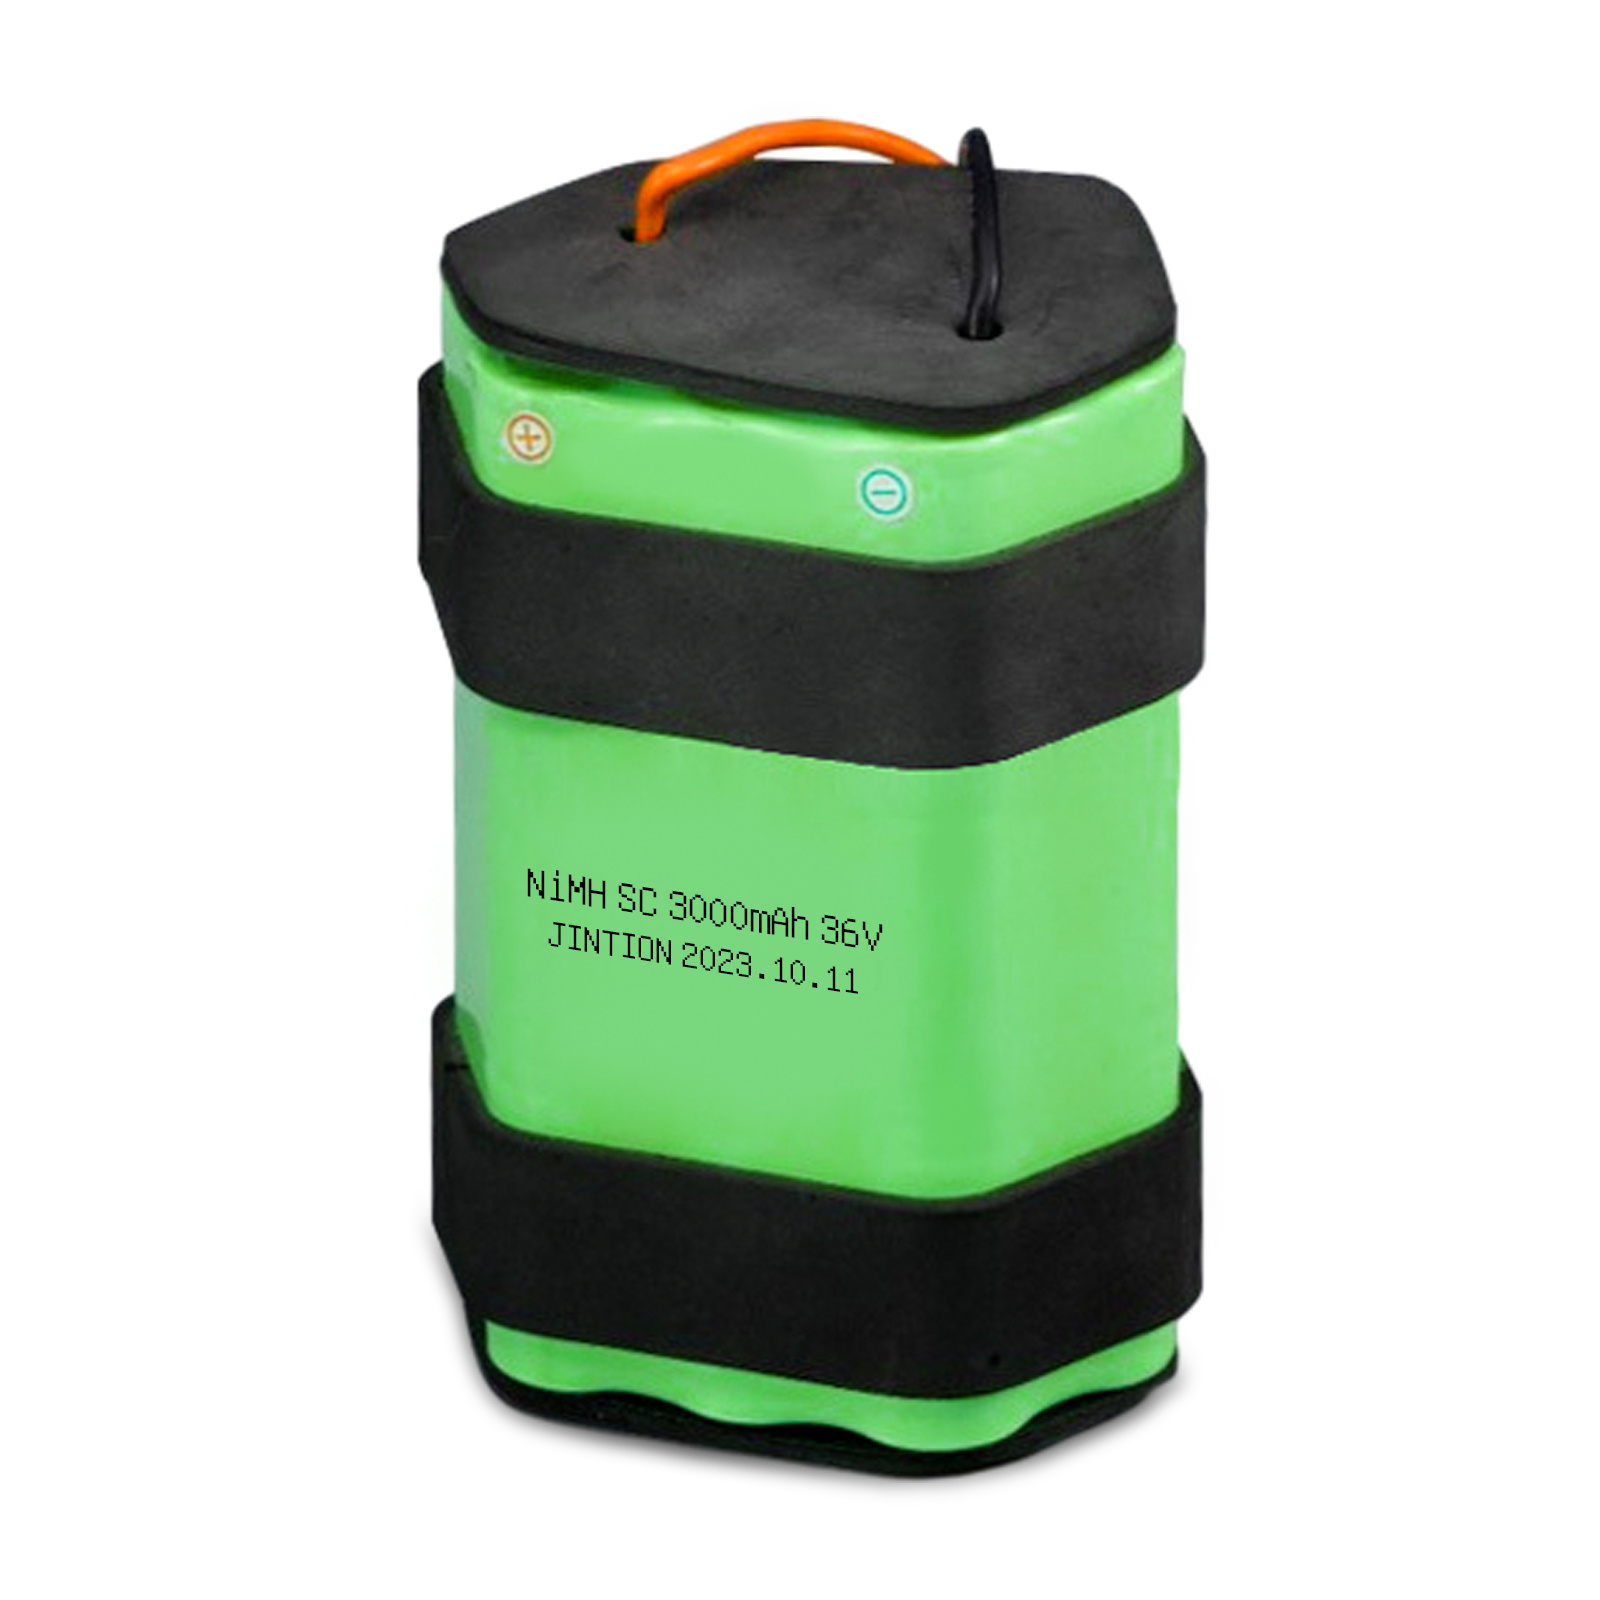 JINTION 36V Ni-MH Sub C 3000mAh rechargeable battery for Battery for electric vehicle instrument